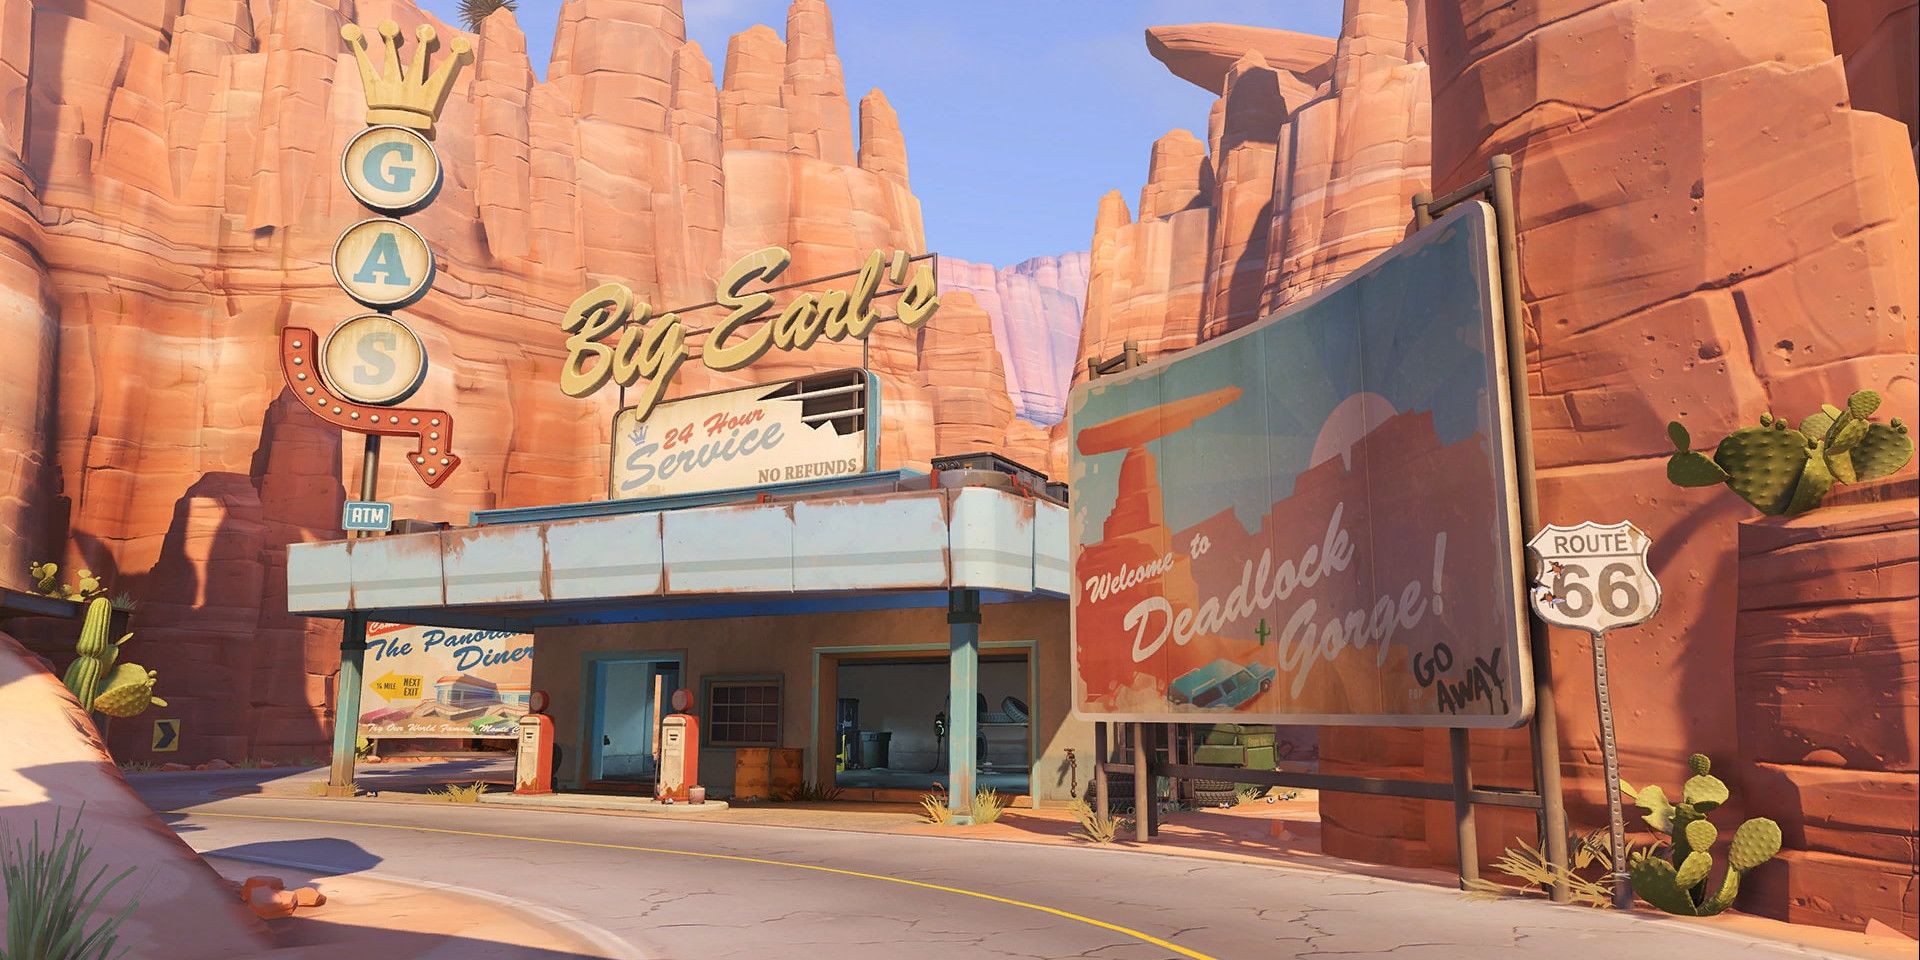 A gas station along Route 66 in Overwatch